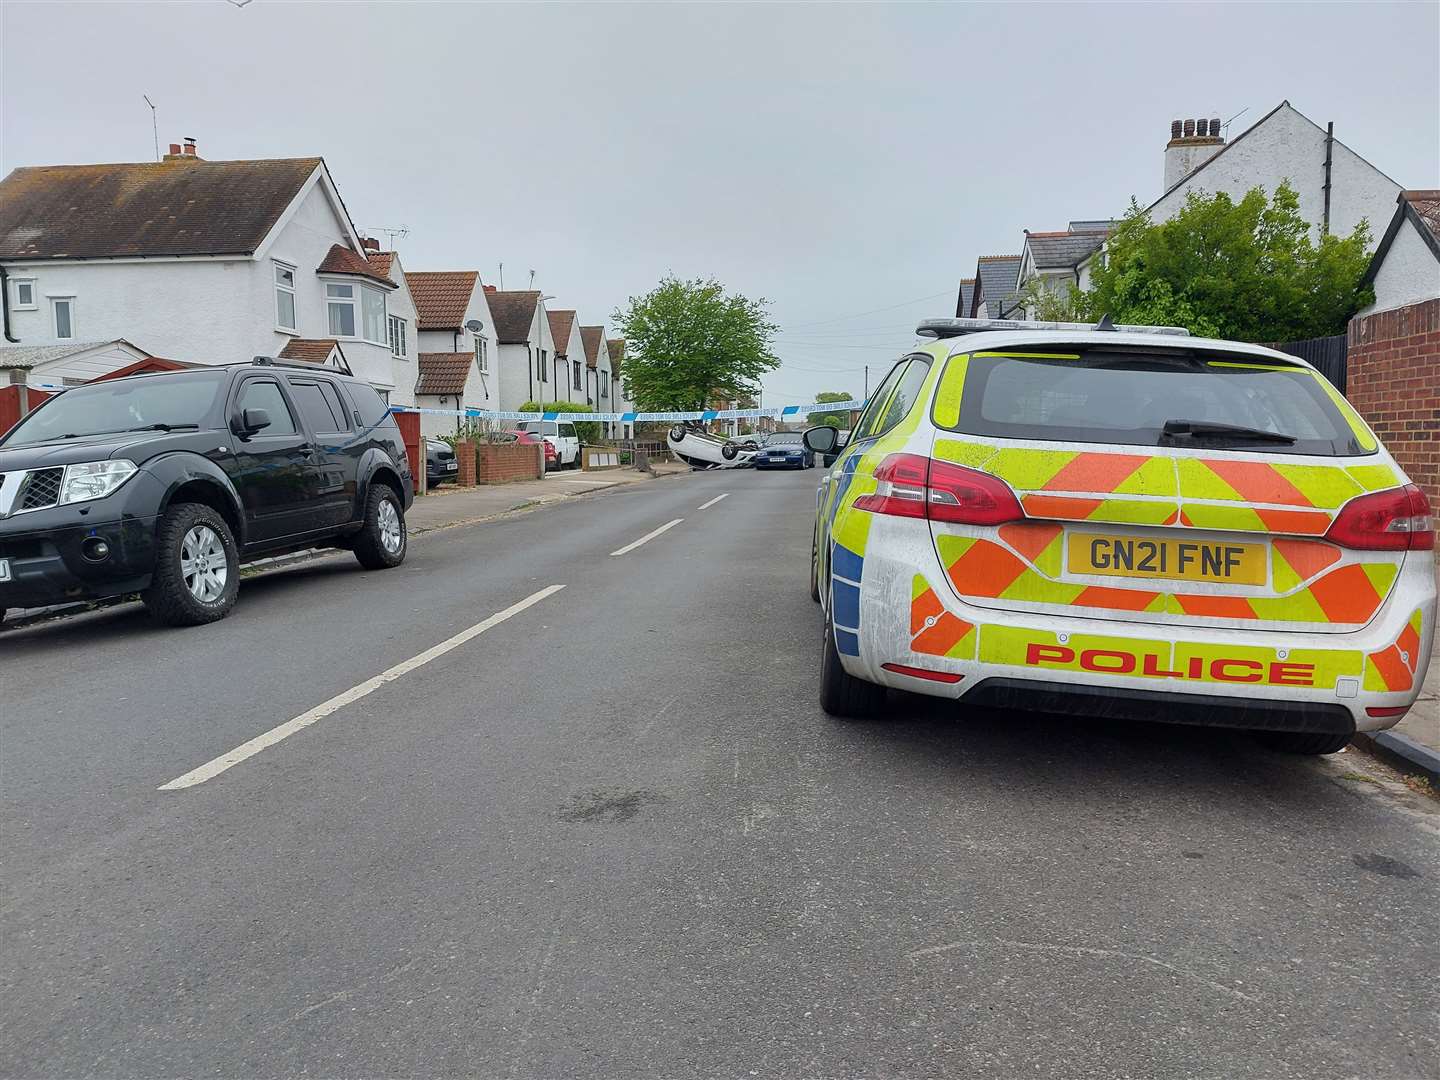 Police were called to the scene in Stanley Road, Herne Bay, this morning